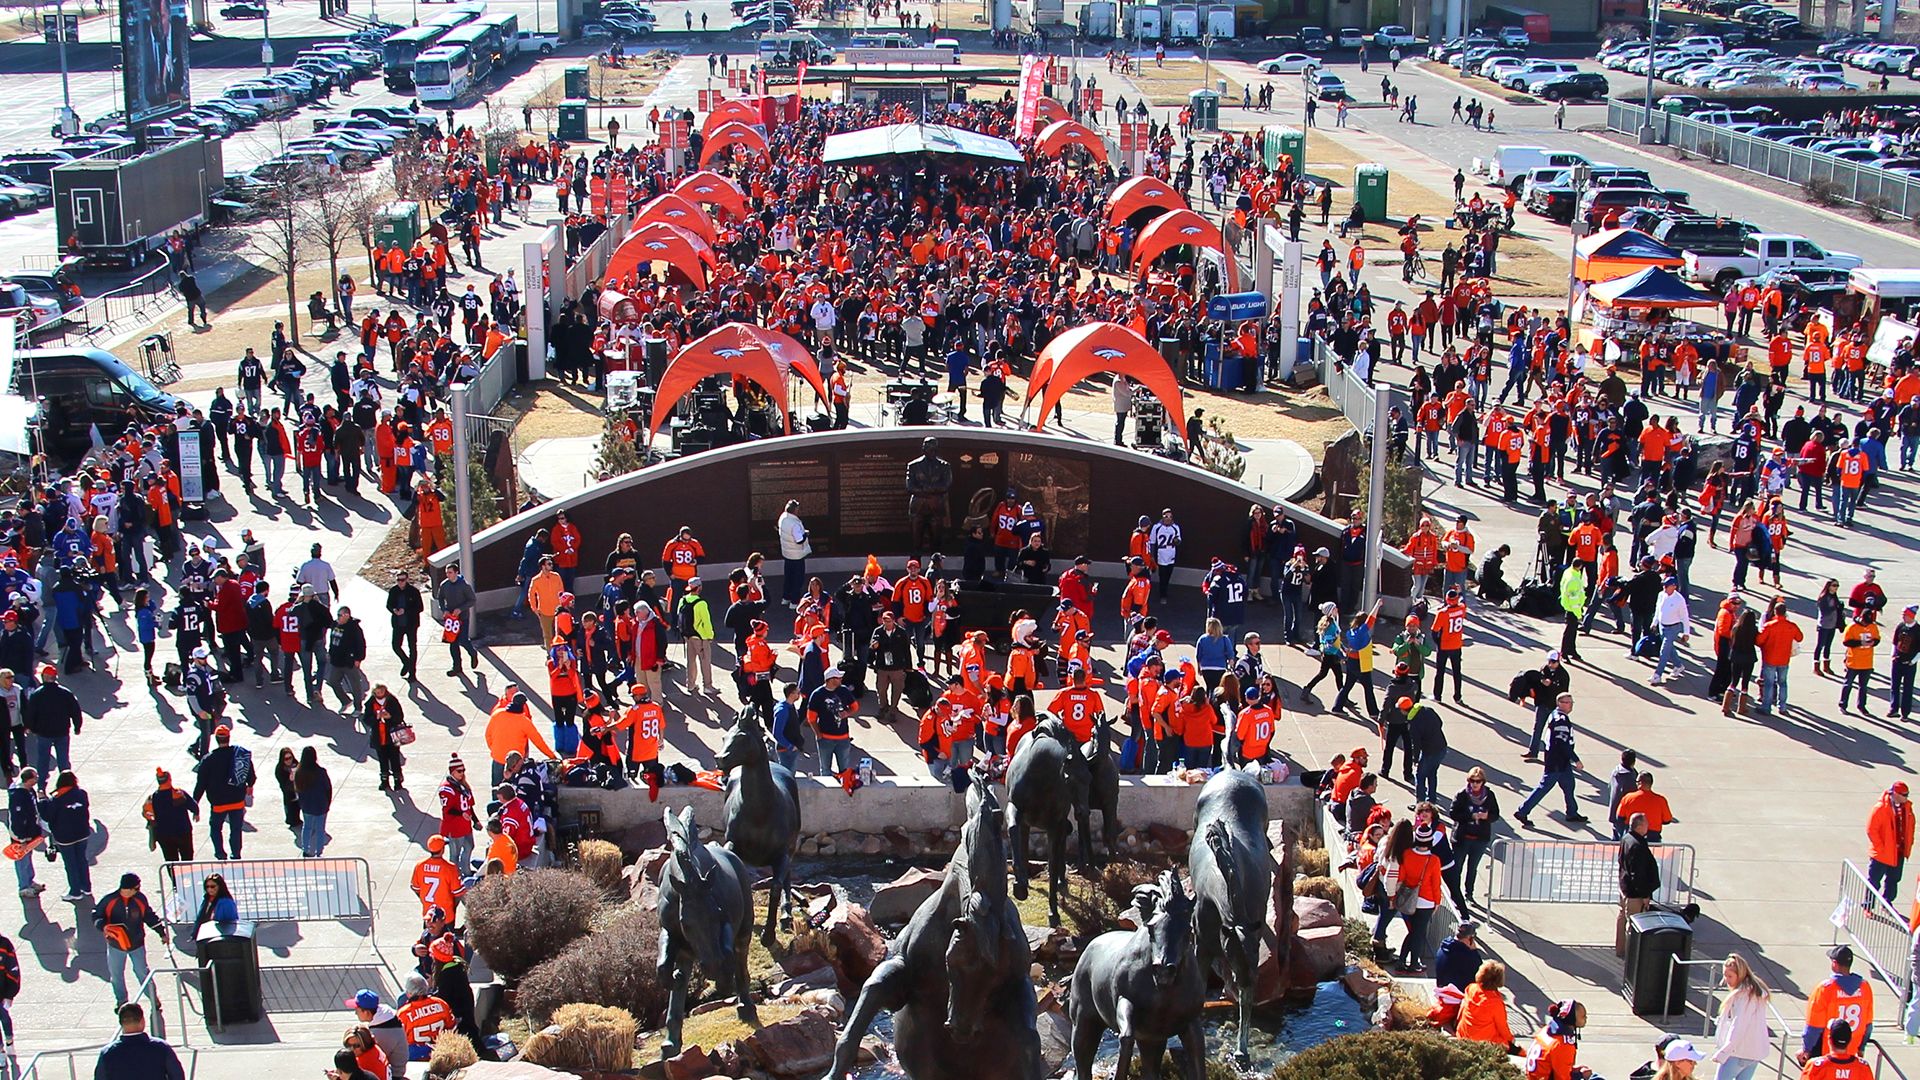 broncos tailgate tickets